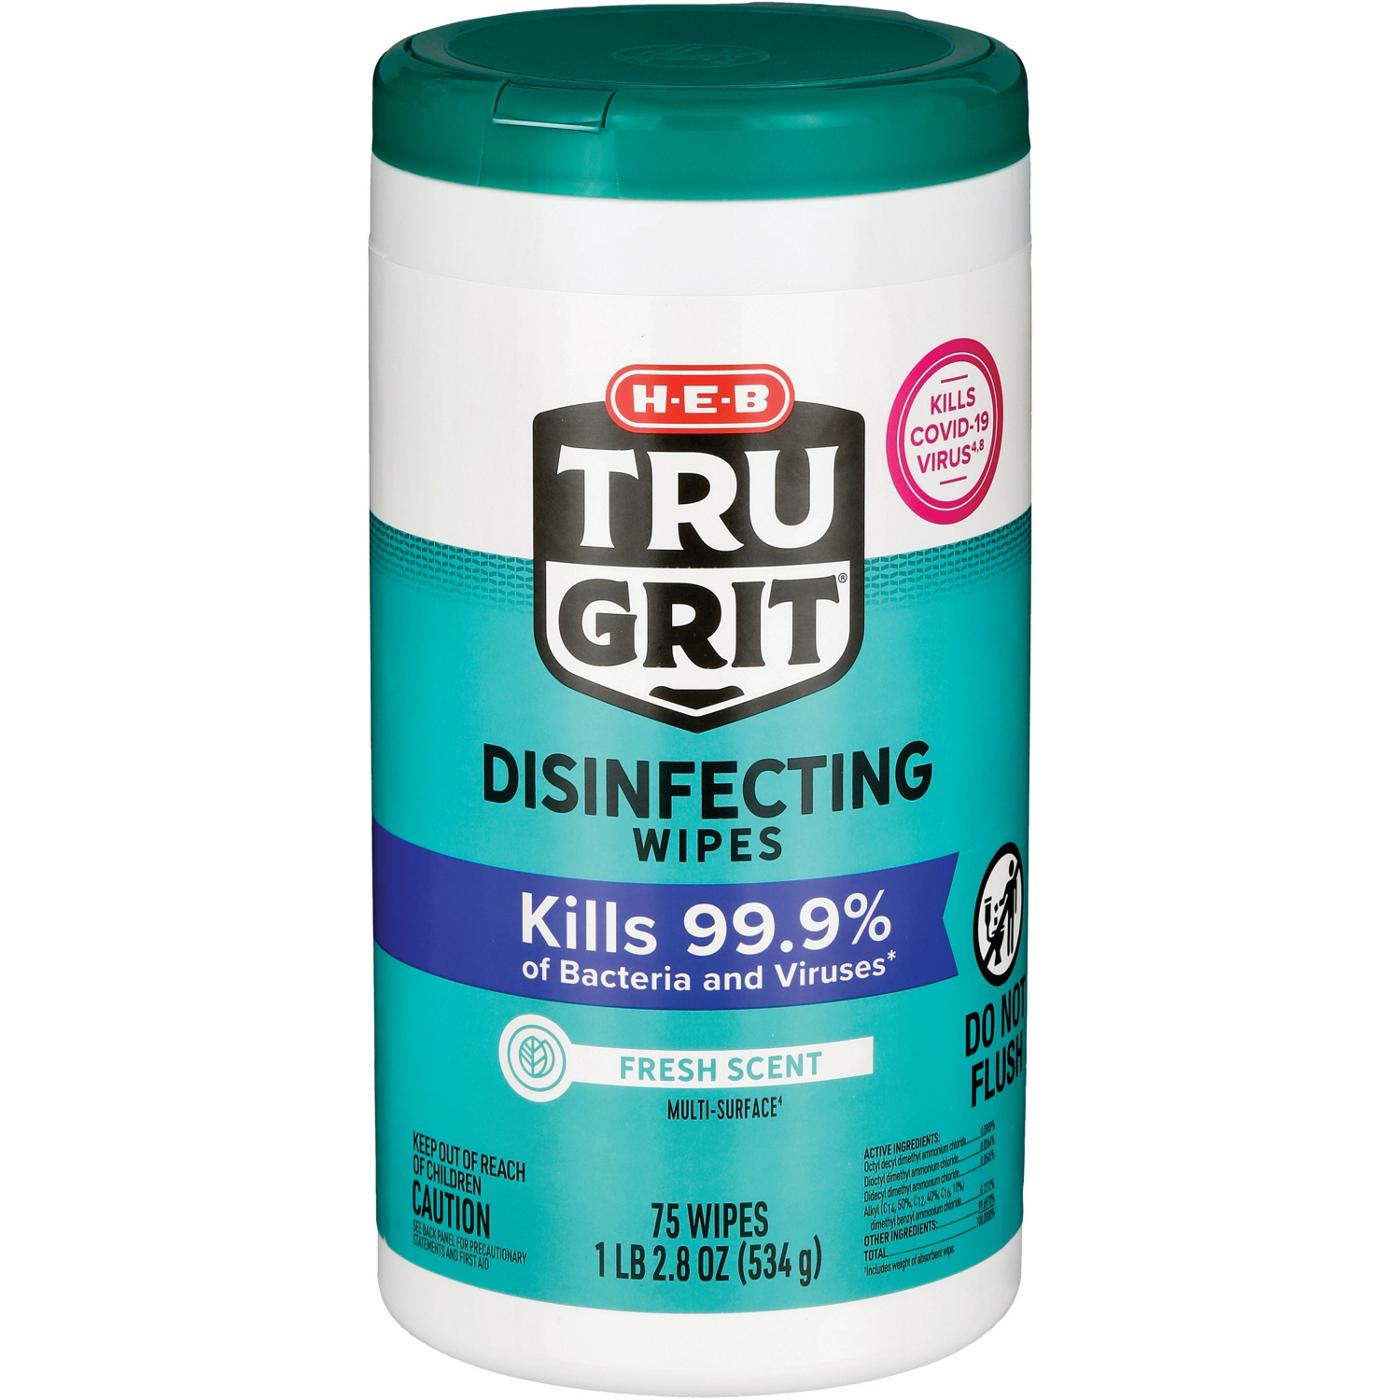 H-E-B Tru Grit Disinfecting Wipes - Fresh Scent; image 2 of 2